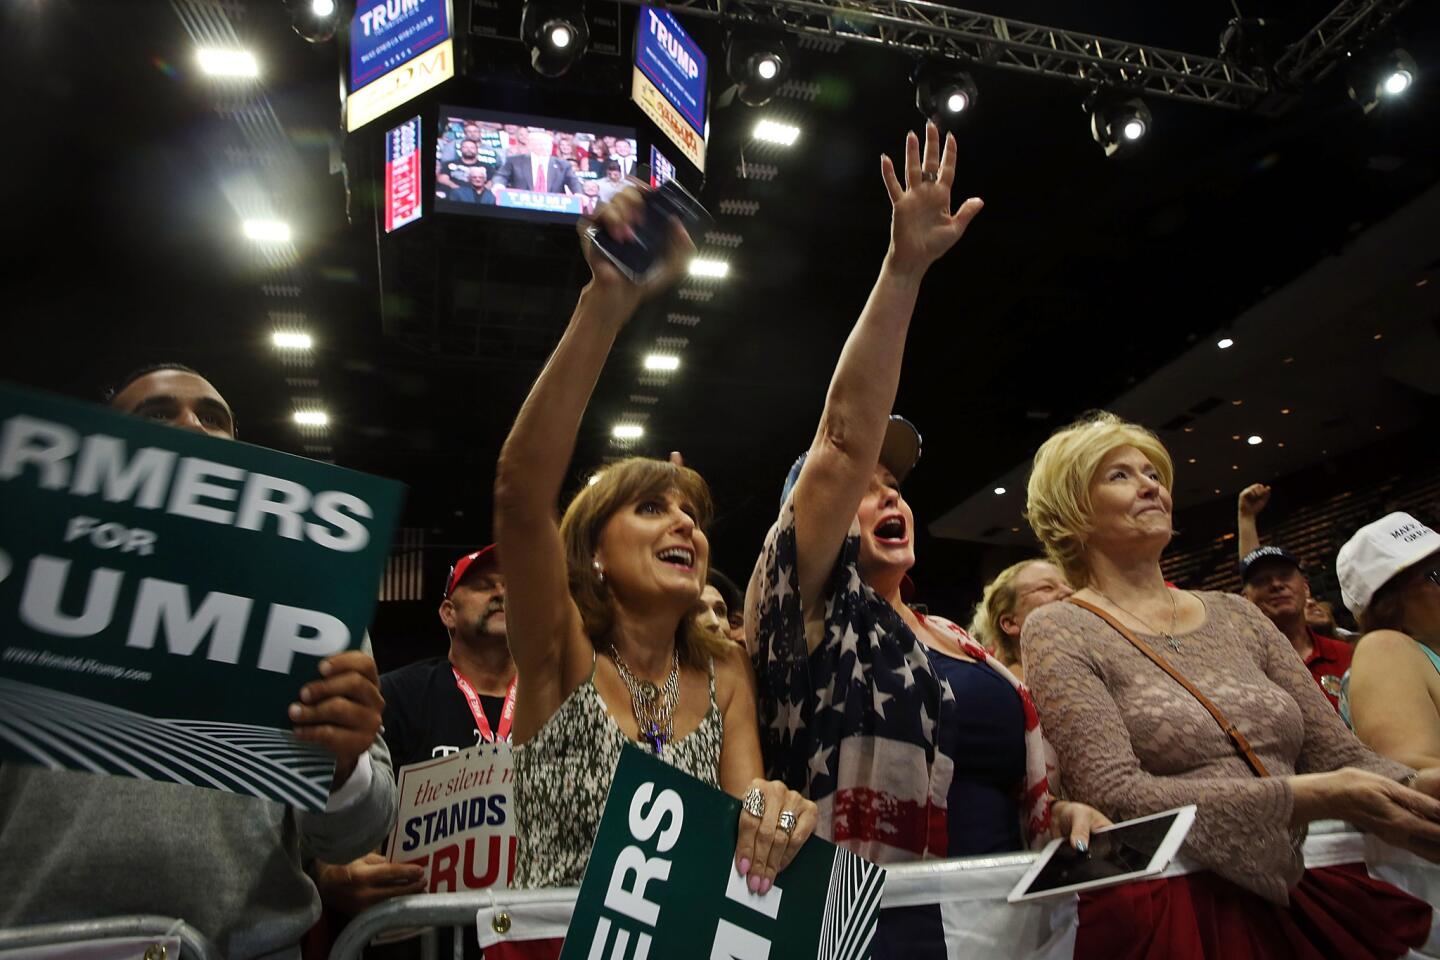 Women cheer as presumptive Republican presidential candidate Donald Trump speaks at a rally in Fresno on Friday.